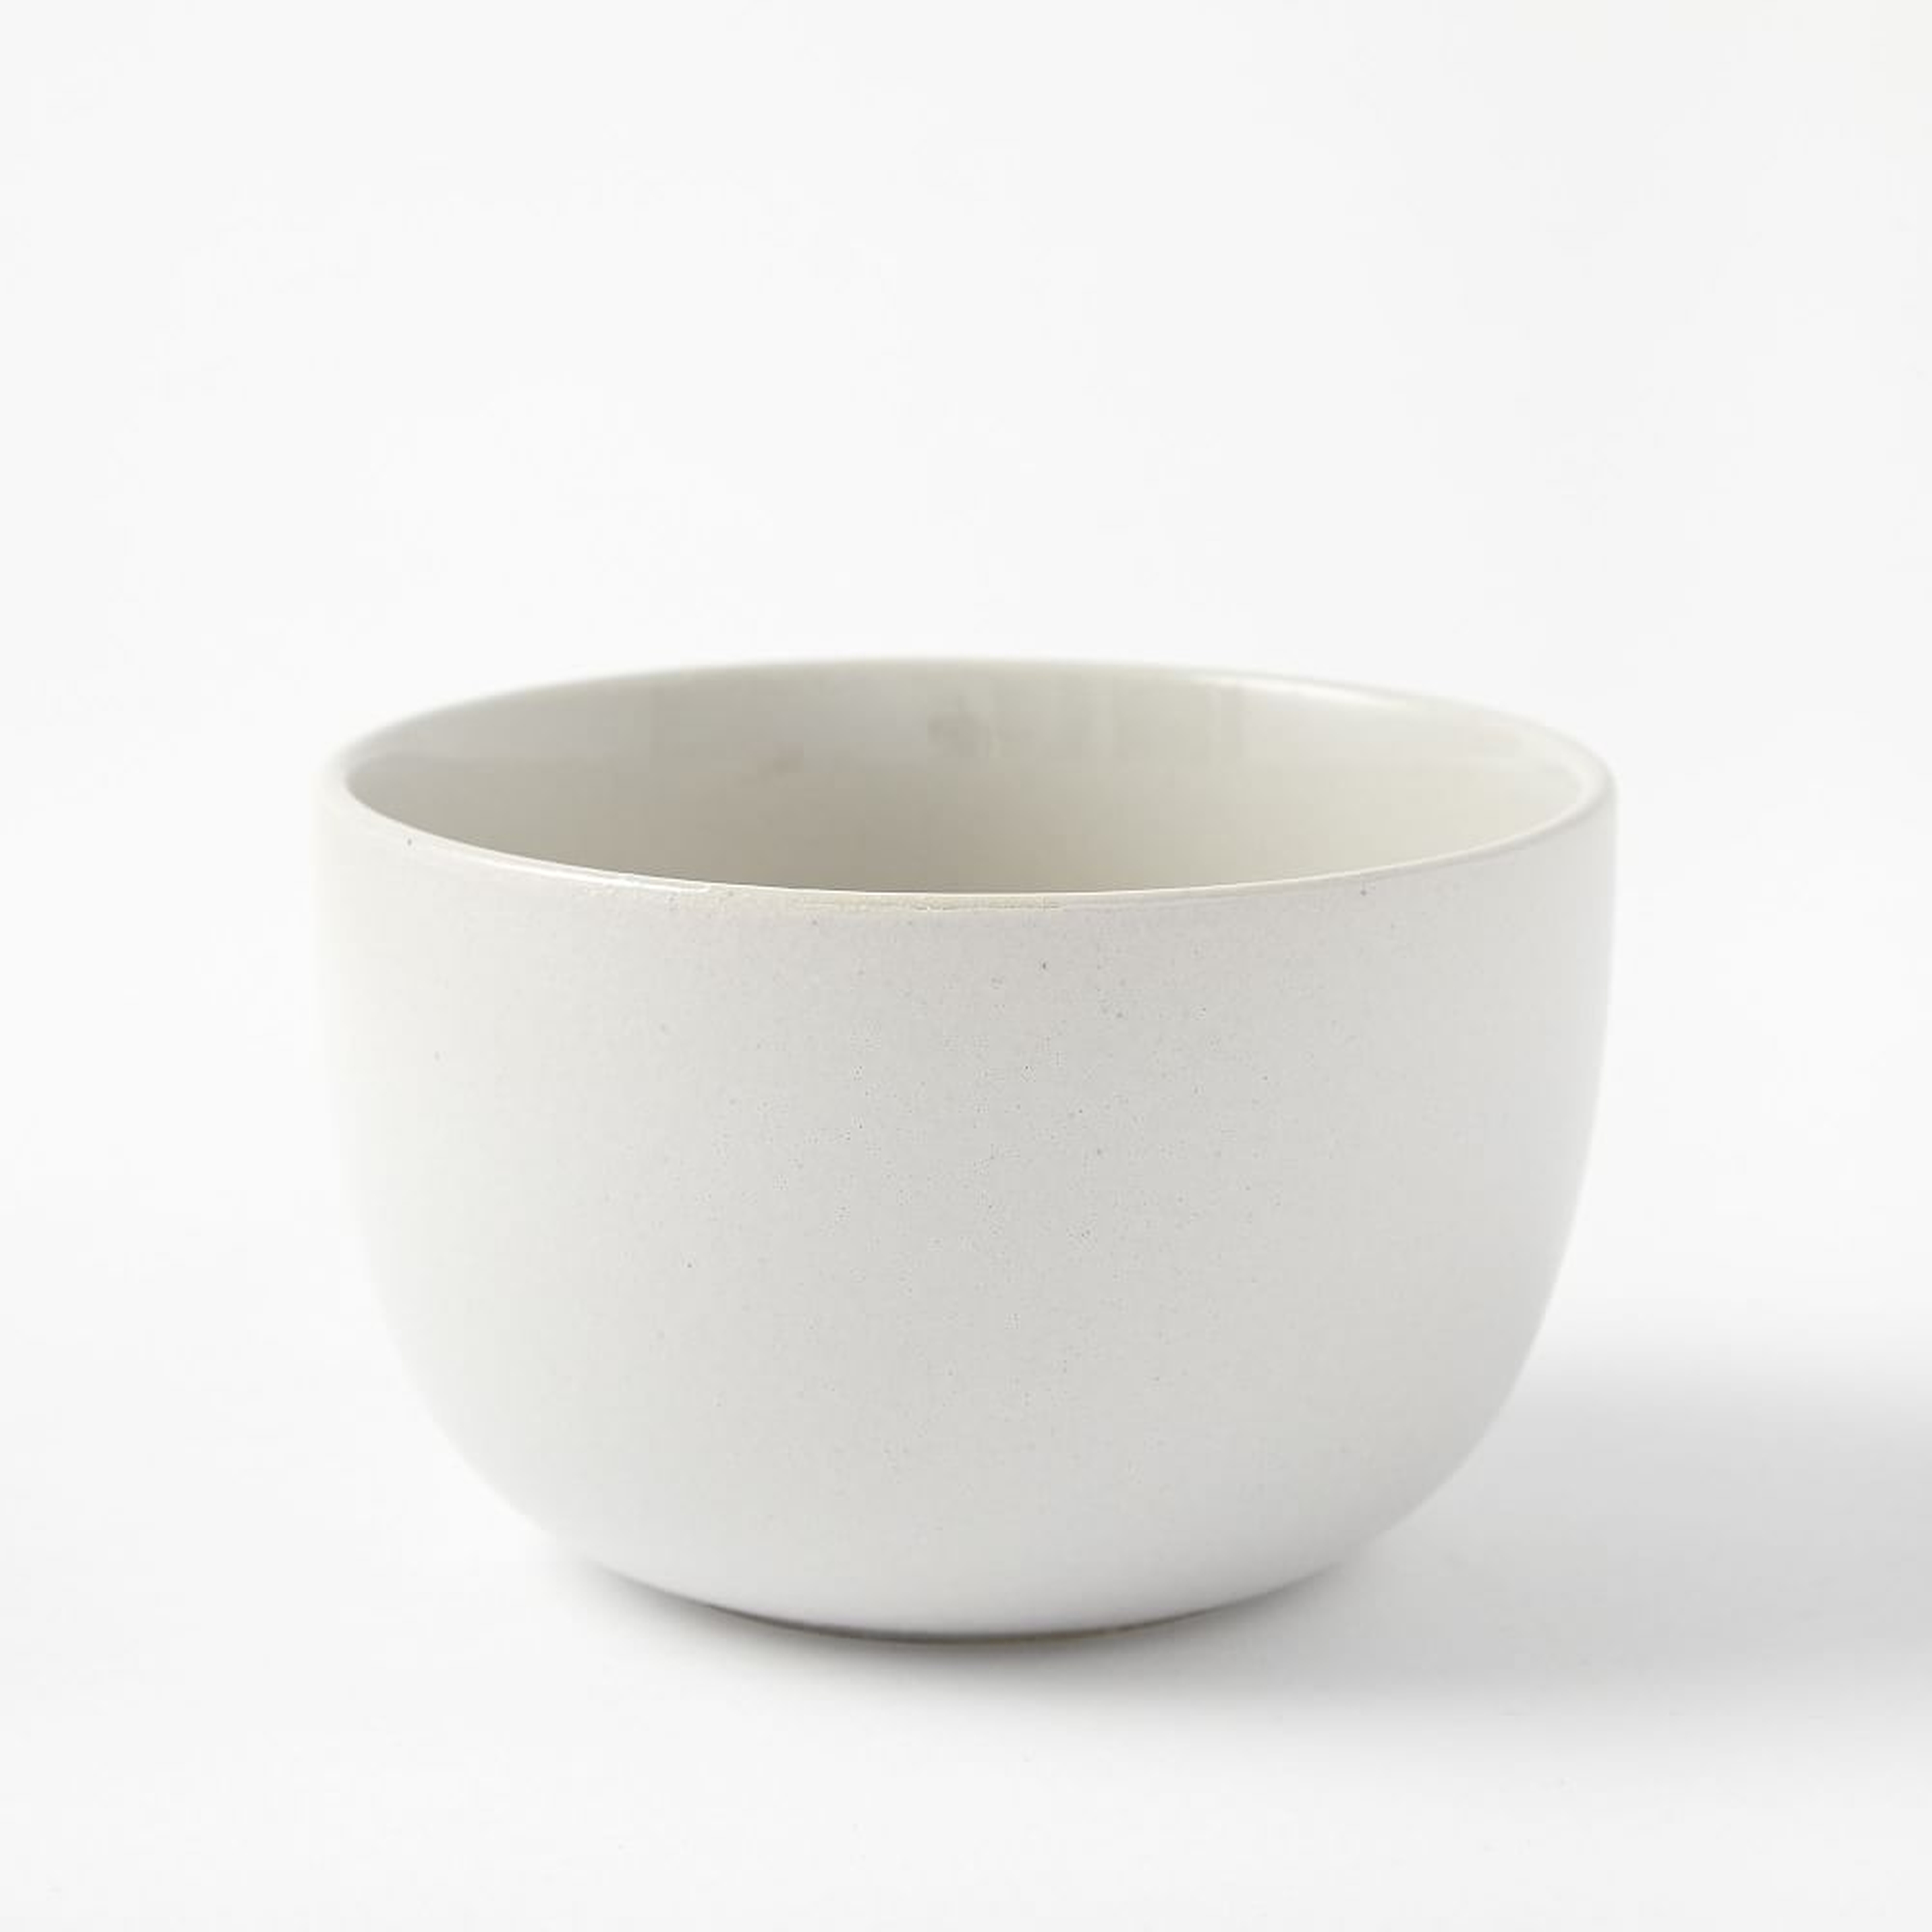 Aaron Probyn Kaloh Cereal Bowl, White, Set of 4 - West Elm